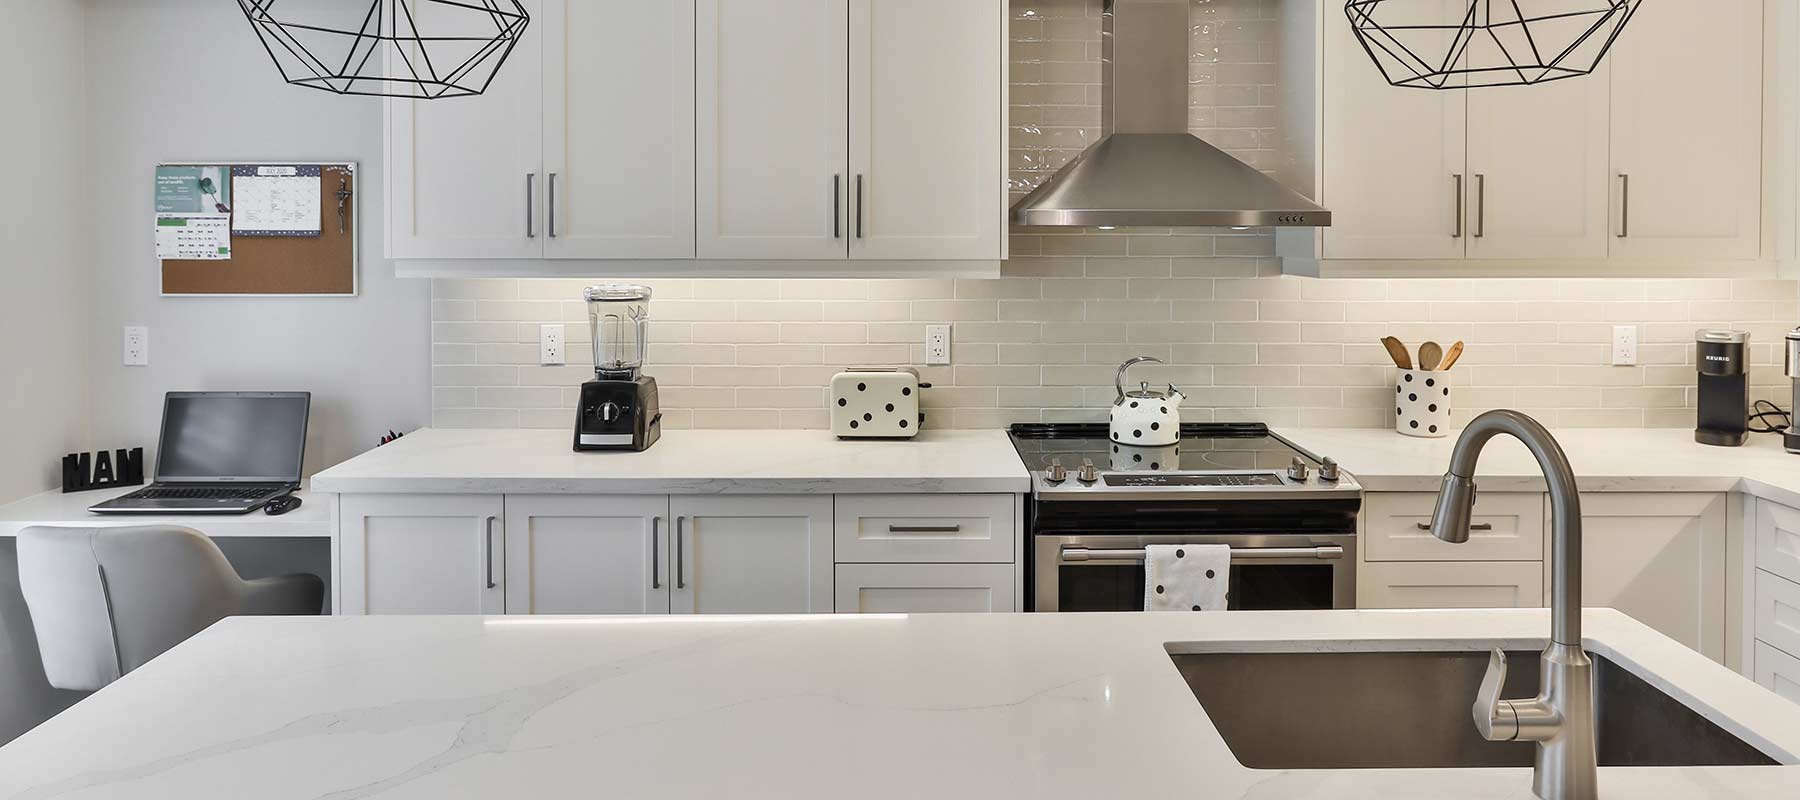 kitchen with polkadot accents